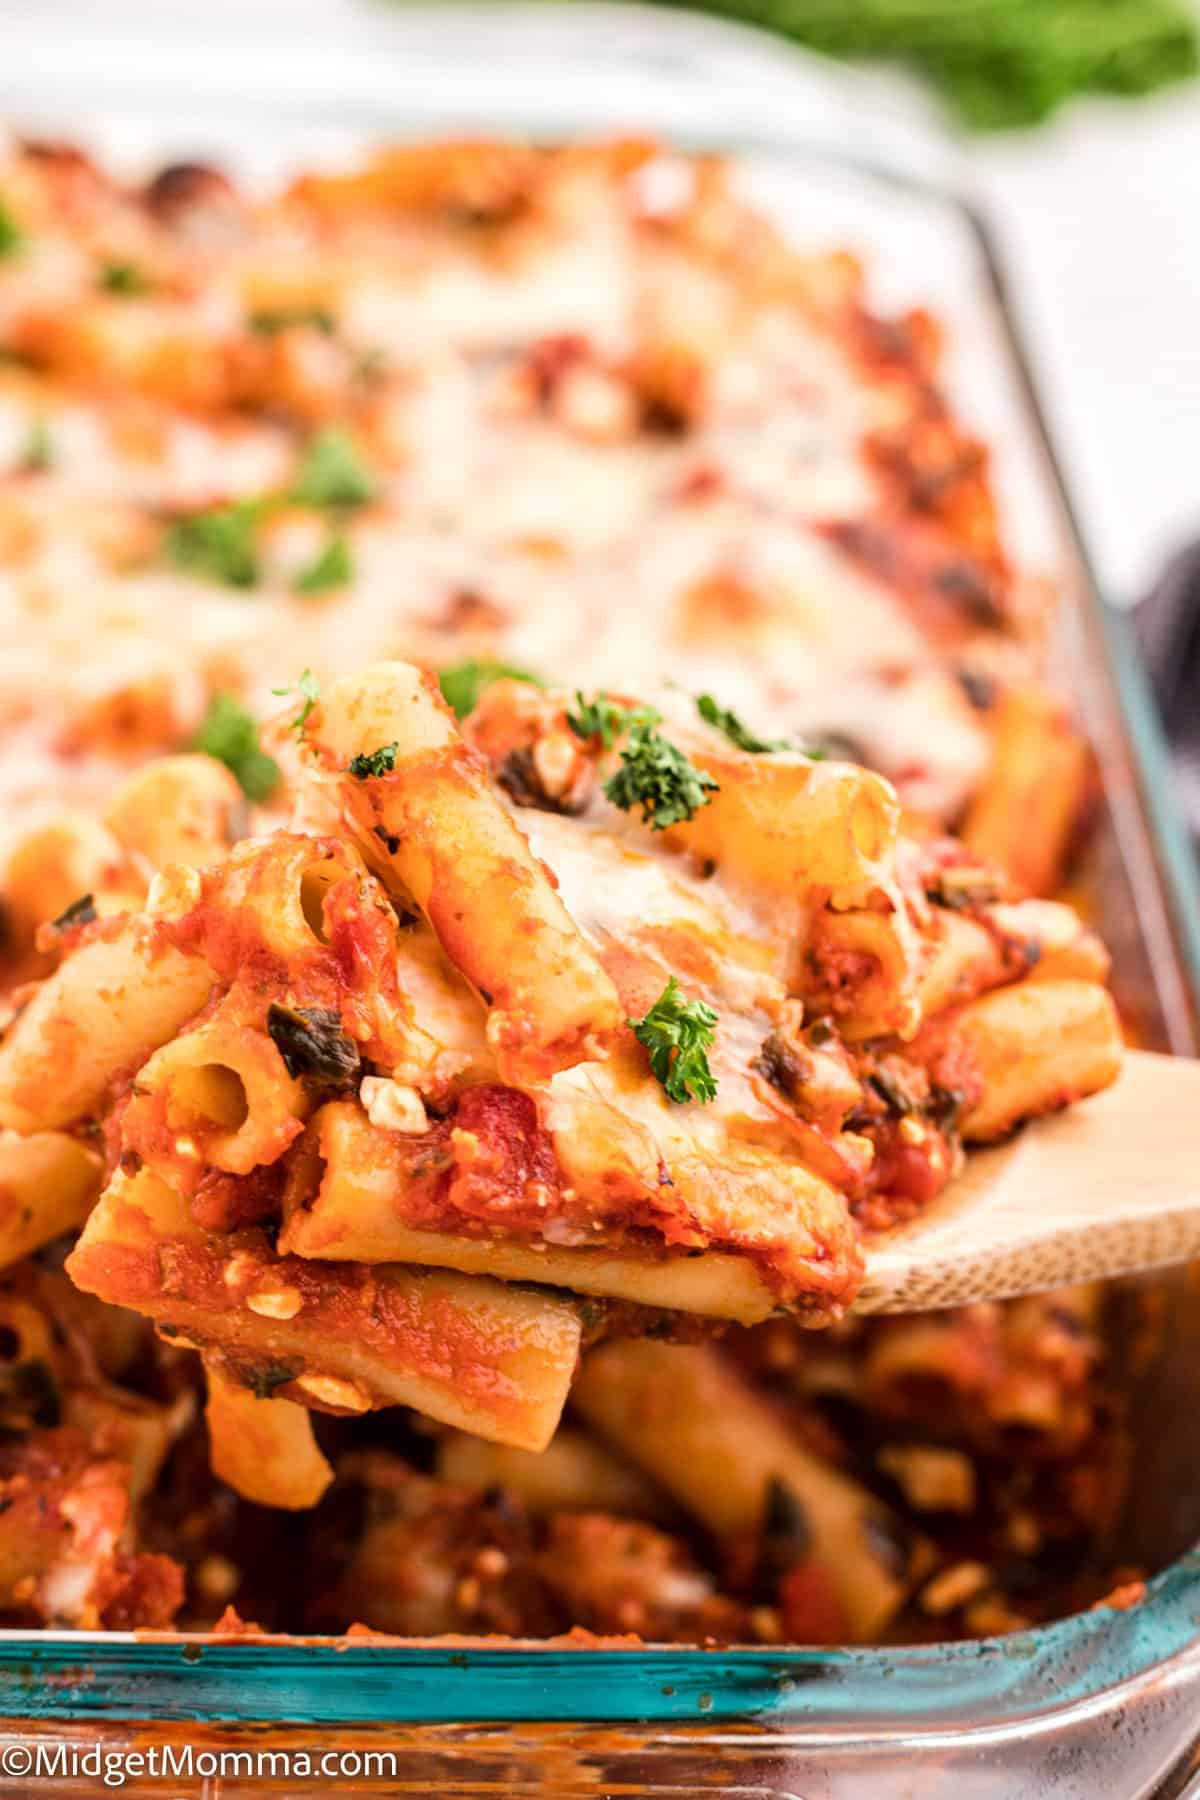 Spoonful of Sausage and Spinach Baked Ziti recipe